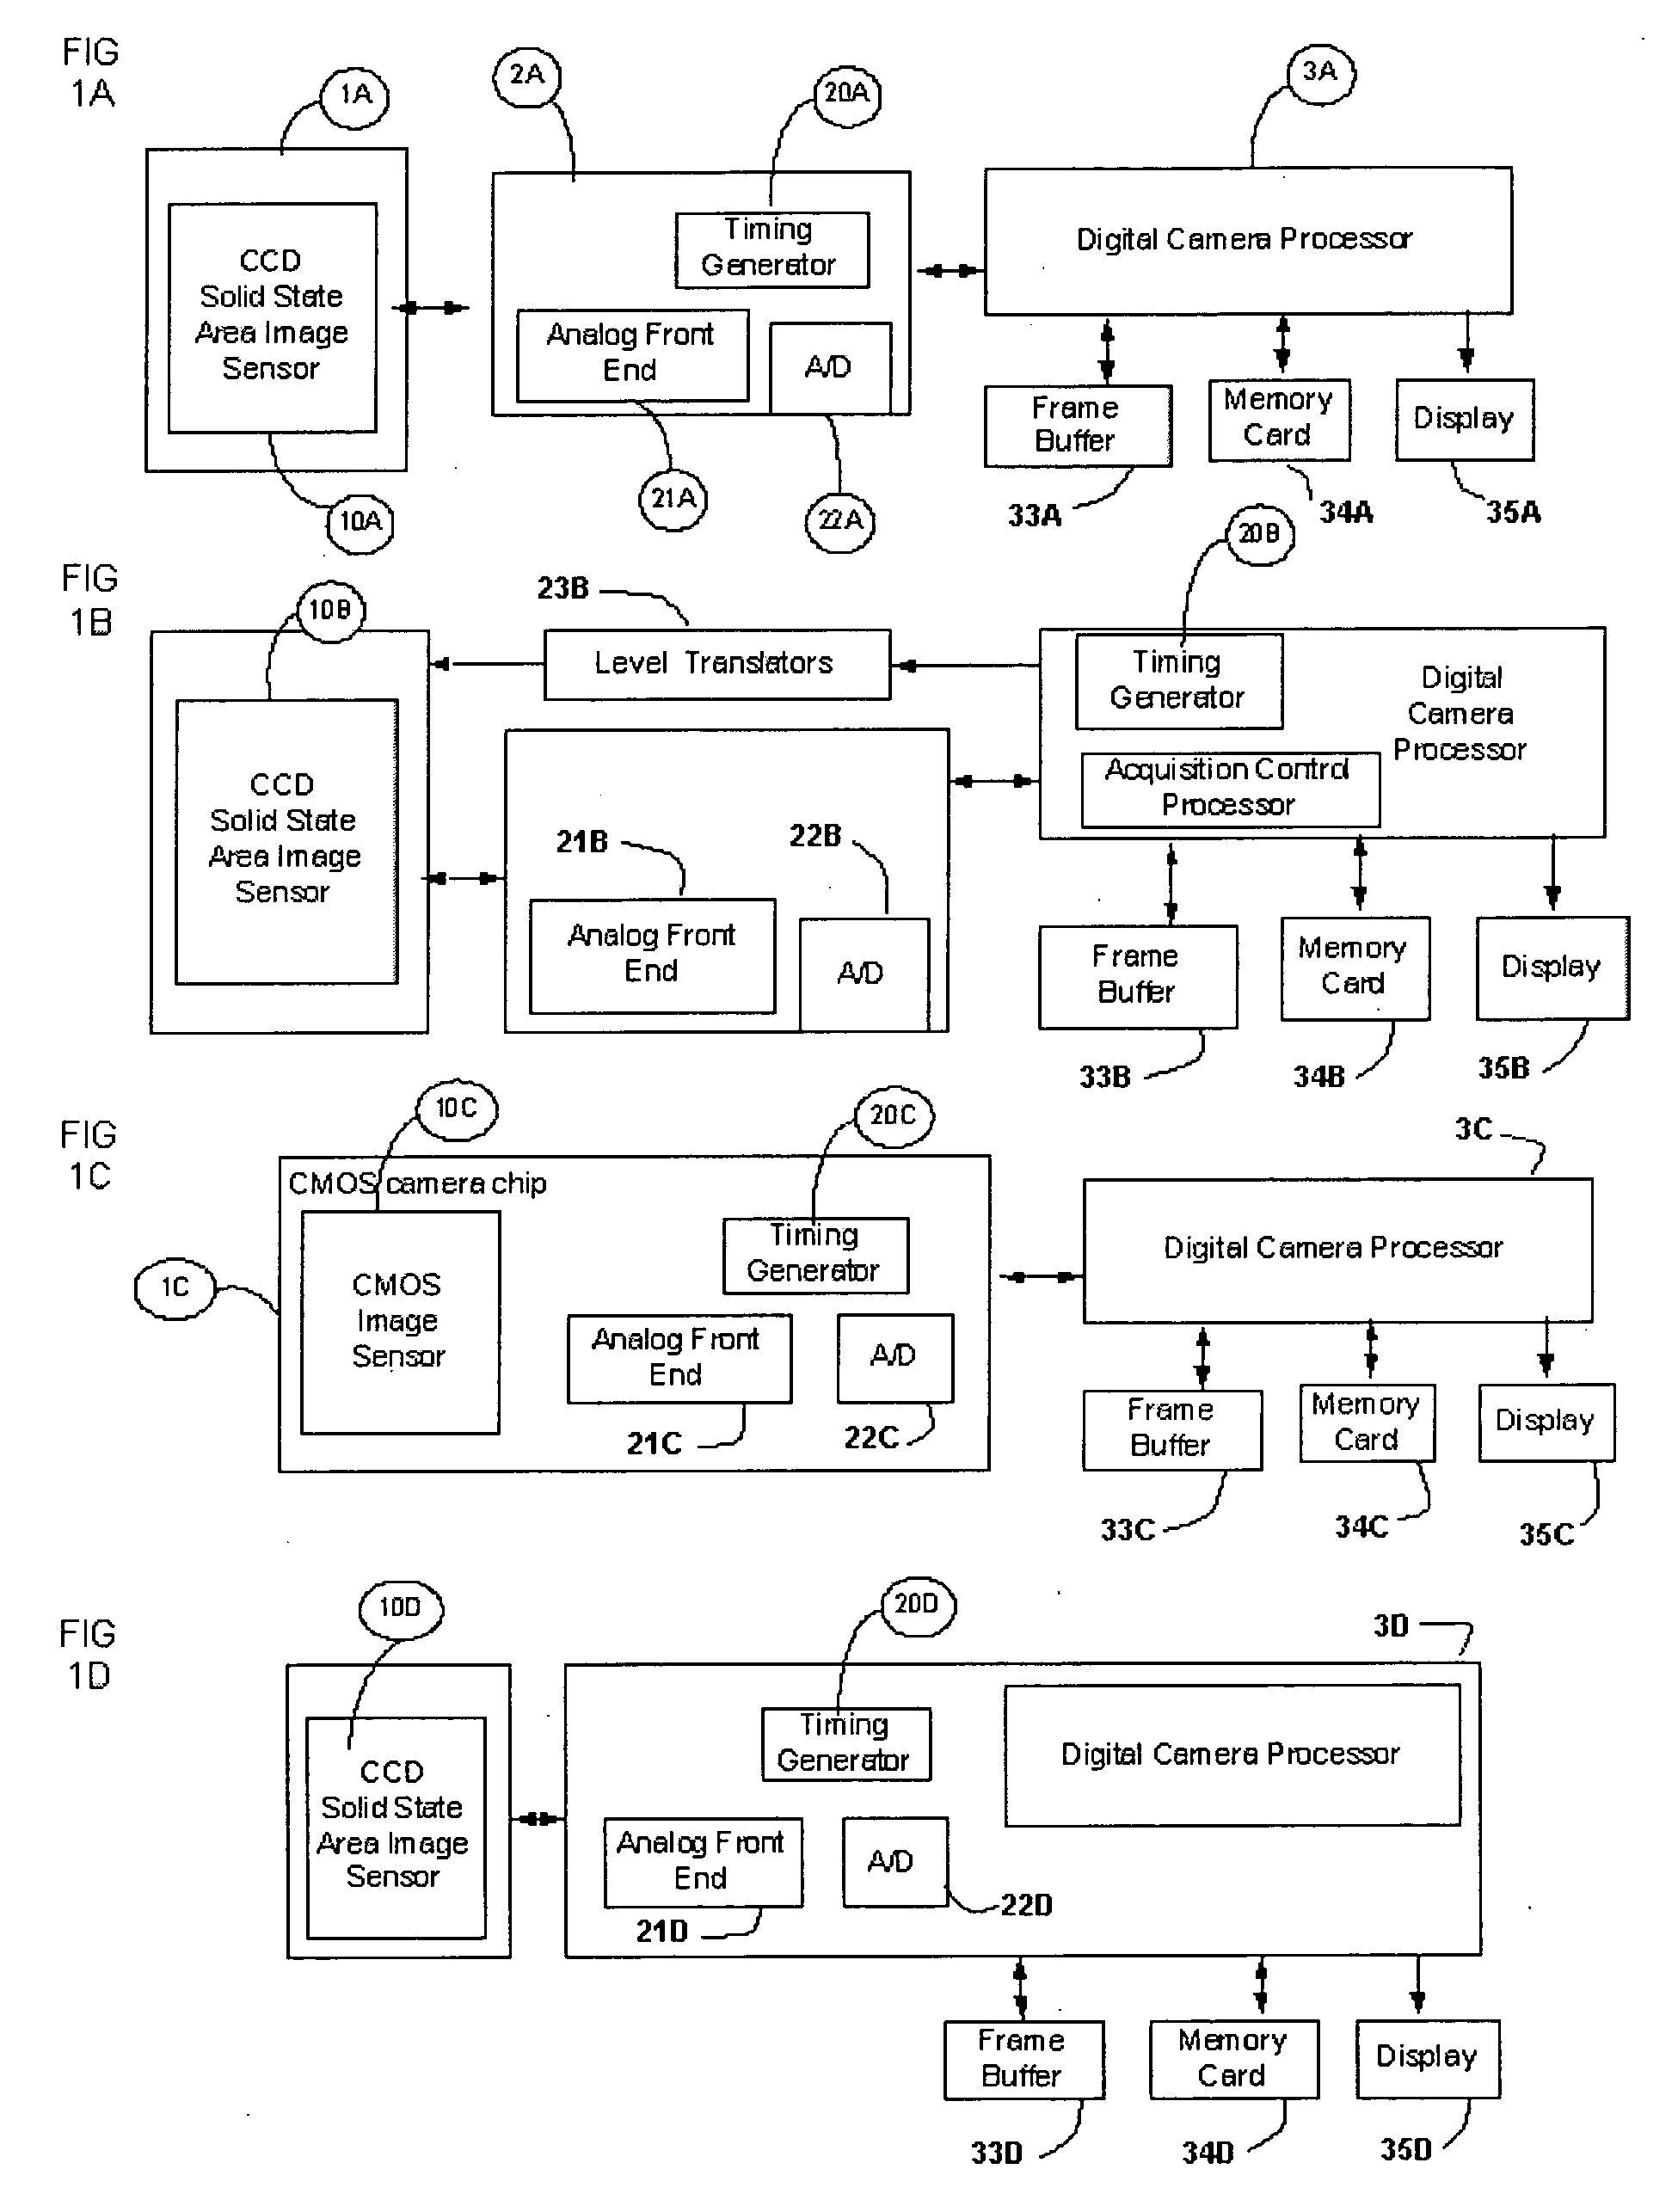 Solid-state area image sensor readout methods for illuminat discrimination and automatic white balance in digital cameras